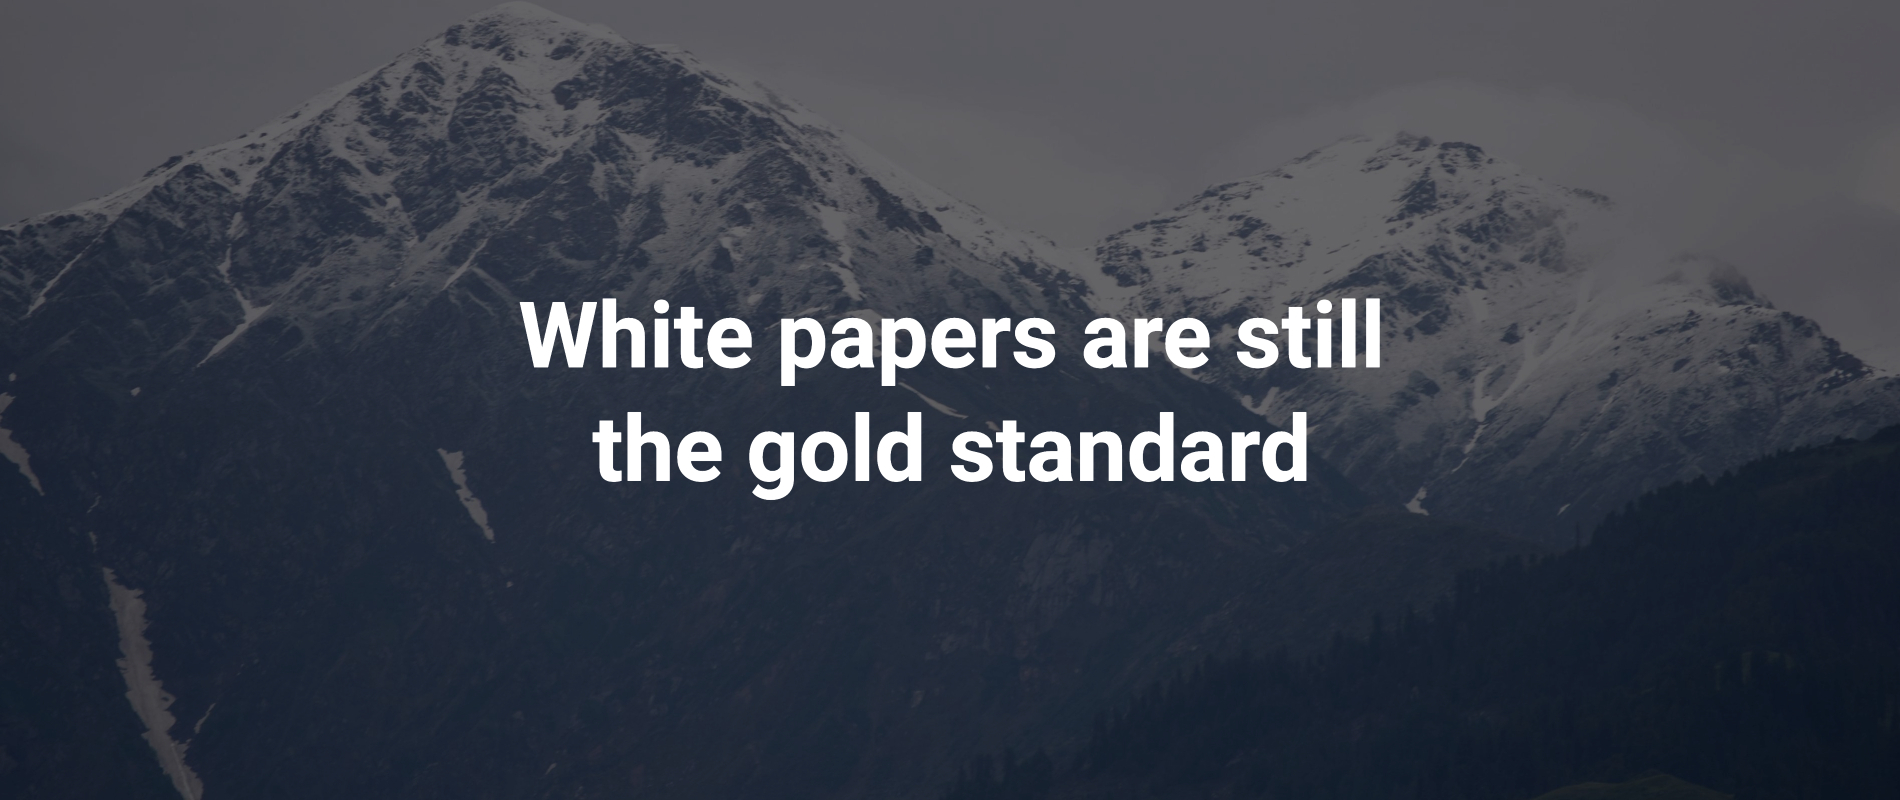 For complex and technical topics, for marketing high-dollar solutions, and for certain audiences, nothing matches the potency of white papers for building trust and authority.